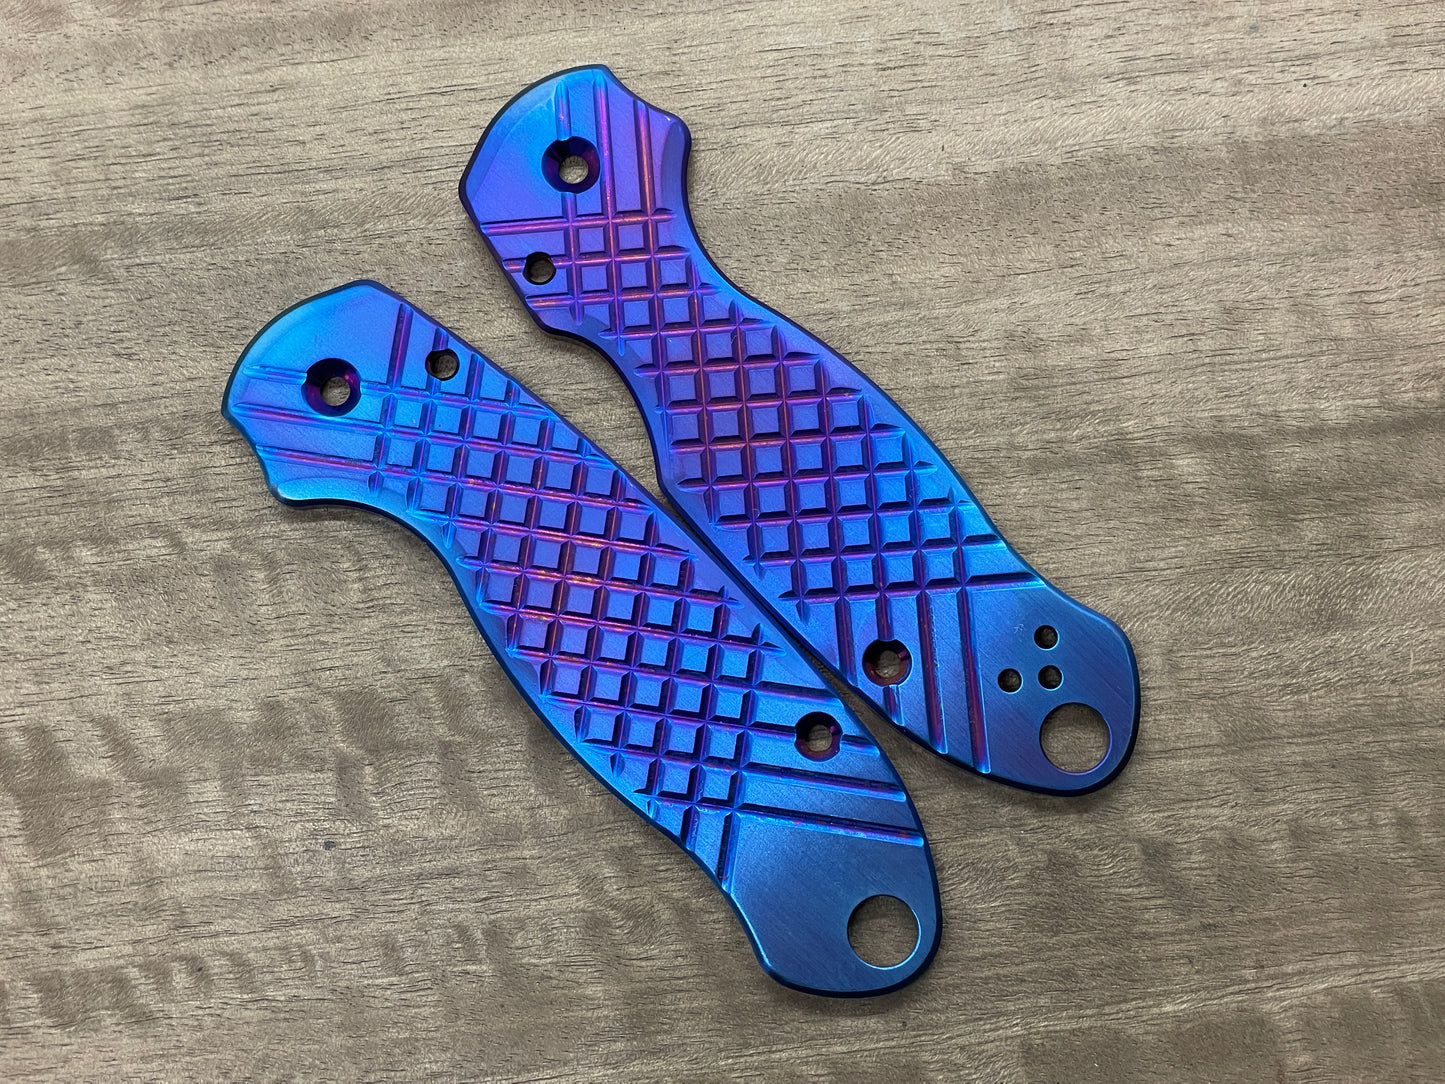 Flamed FRAG milled Titanium scales for Spyderco Para 3